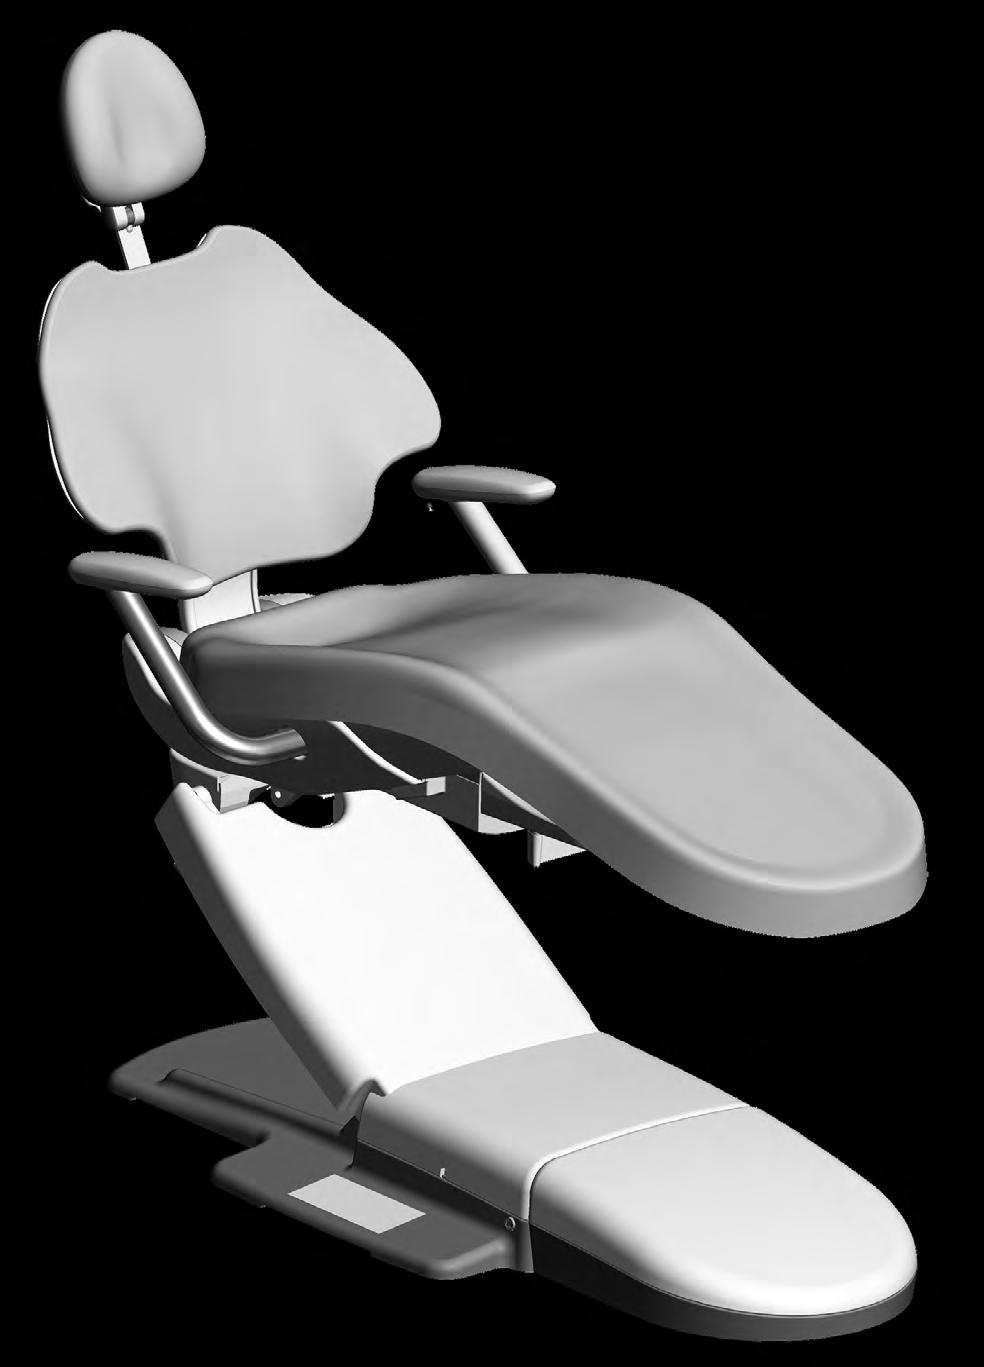 A-dec,, and Dental Chairs Service Reference 8.08.